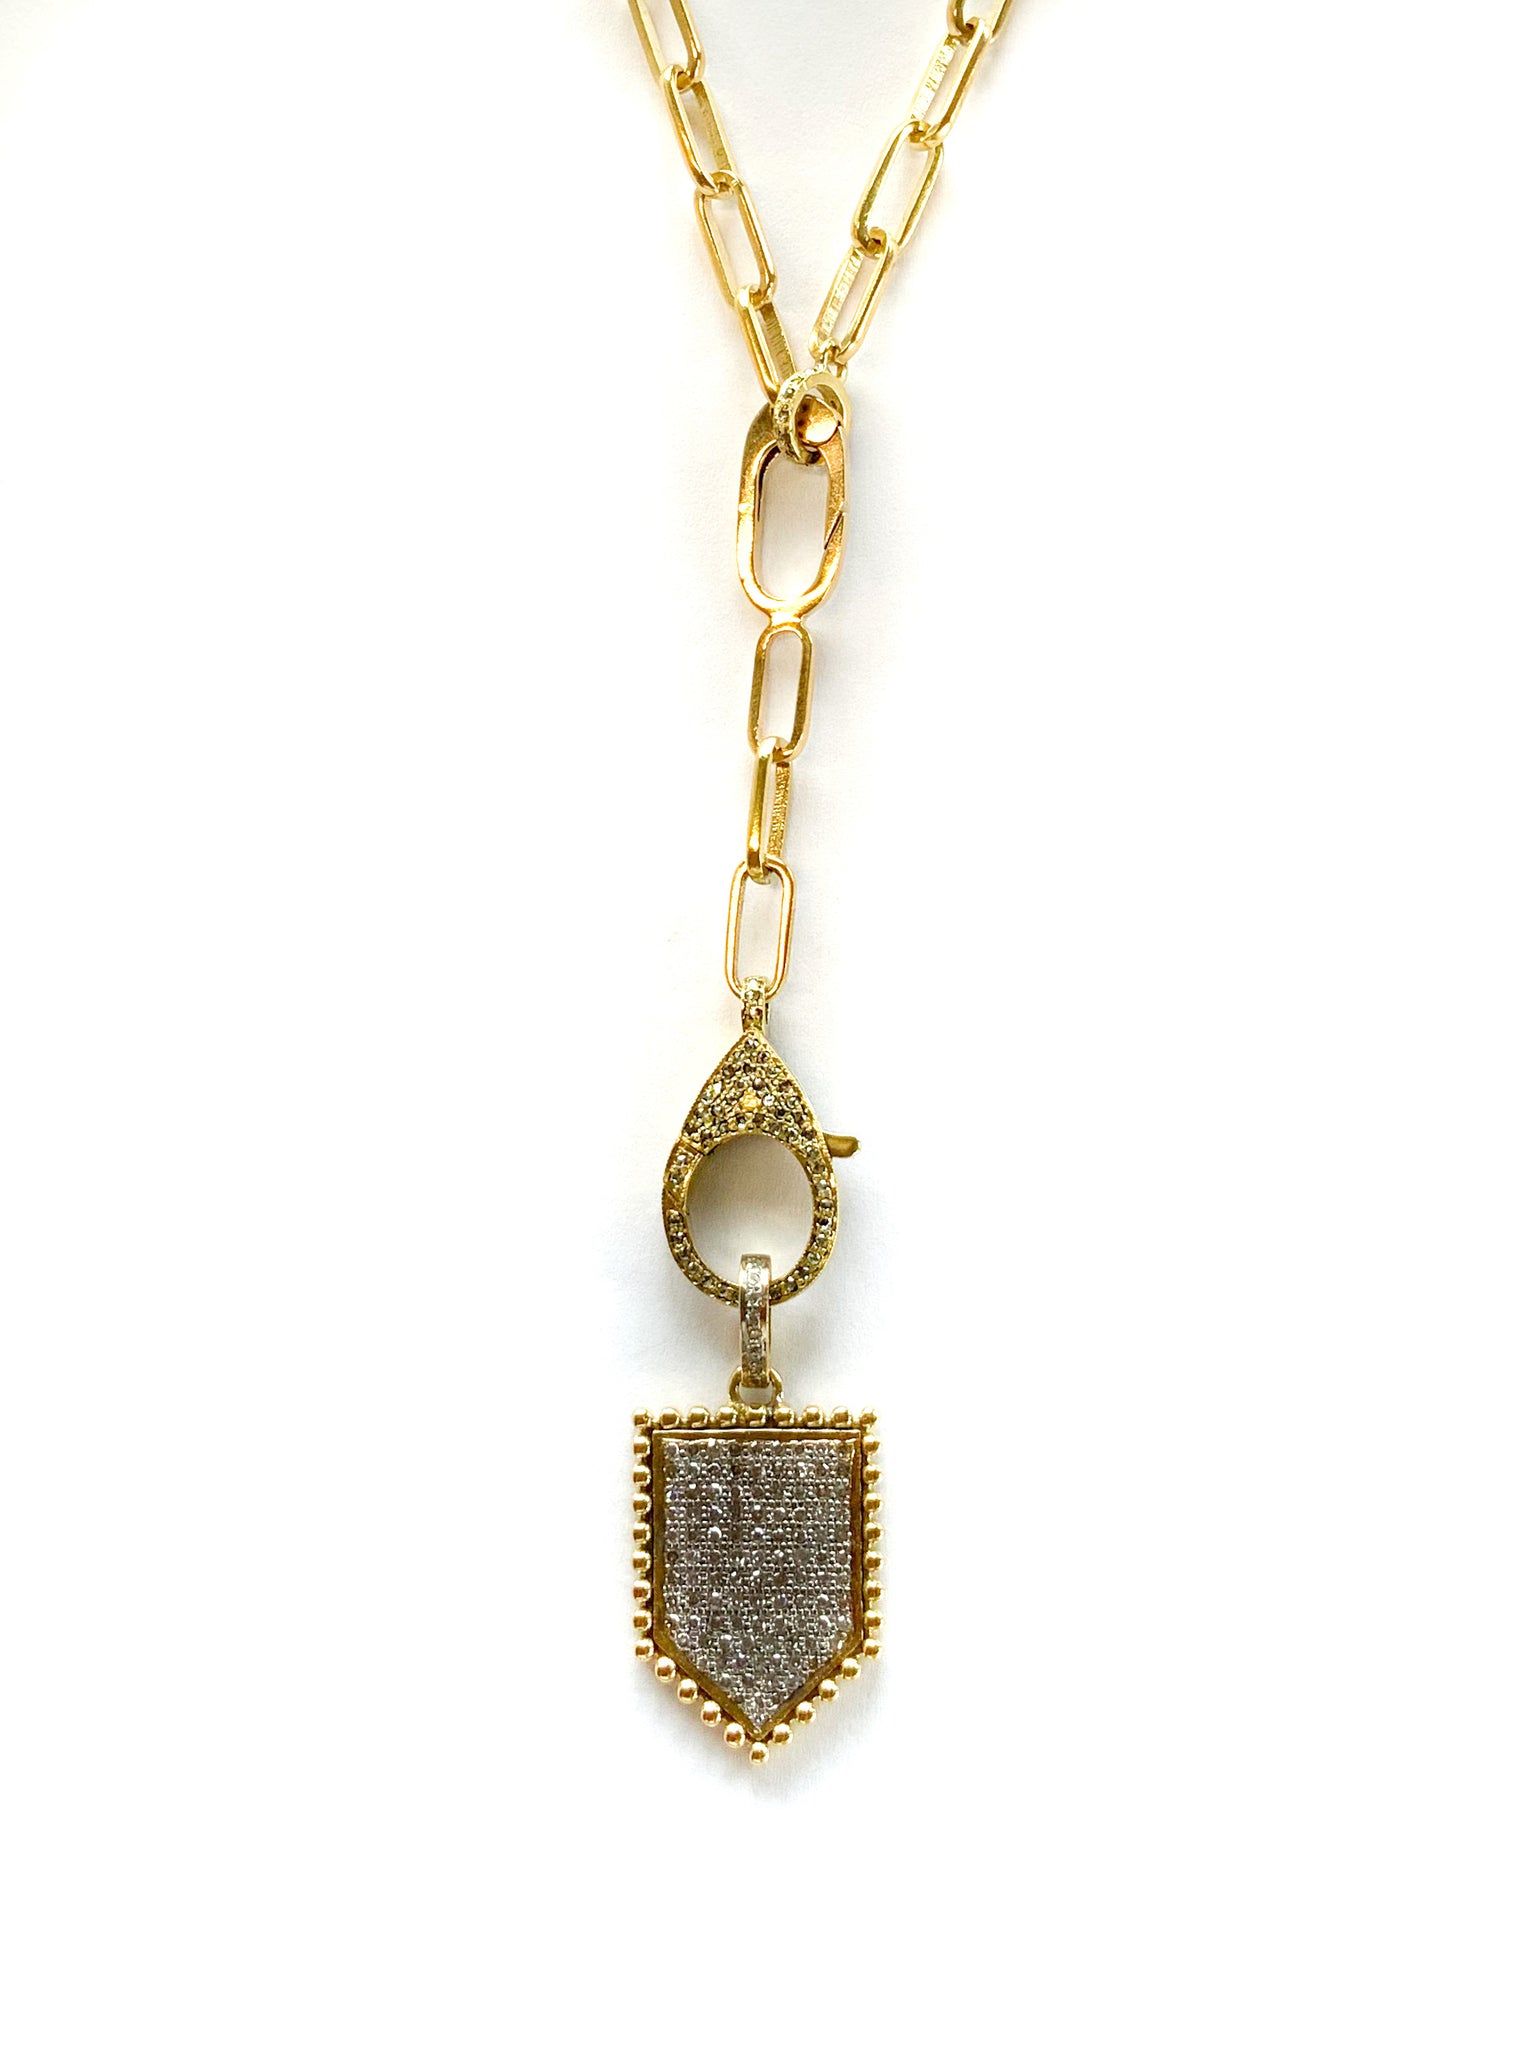 Brass Hidden Double Clip Chain with Pave Diamond Clip and Bale